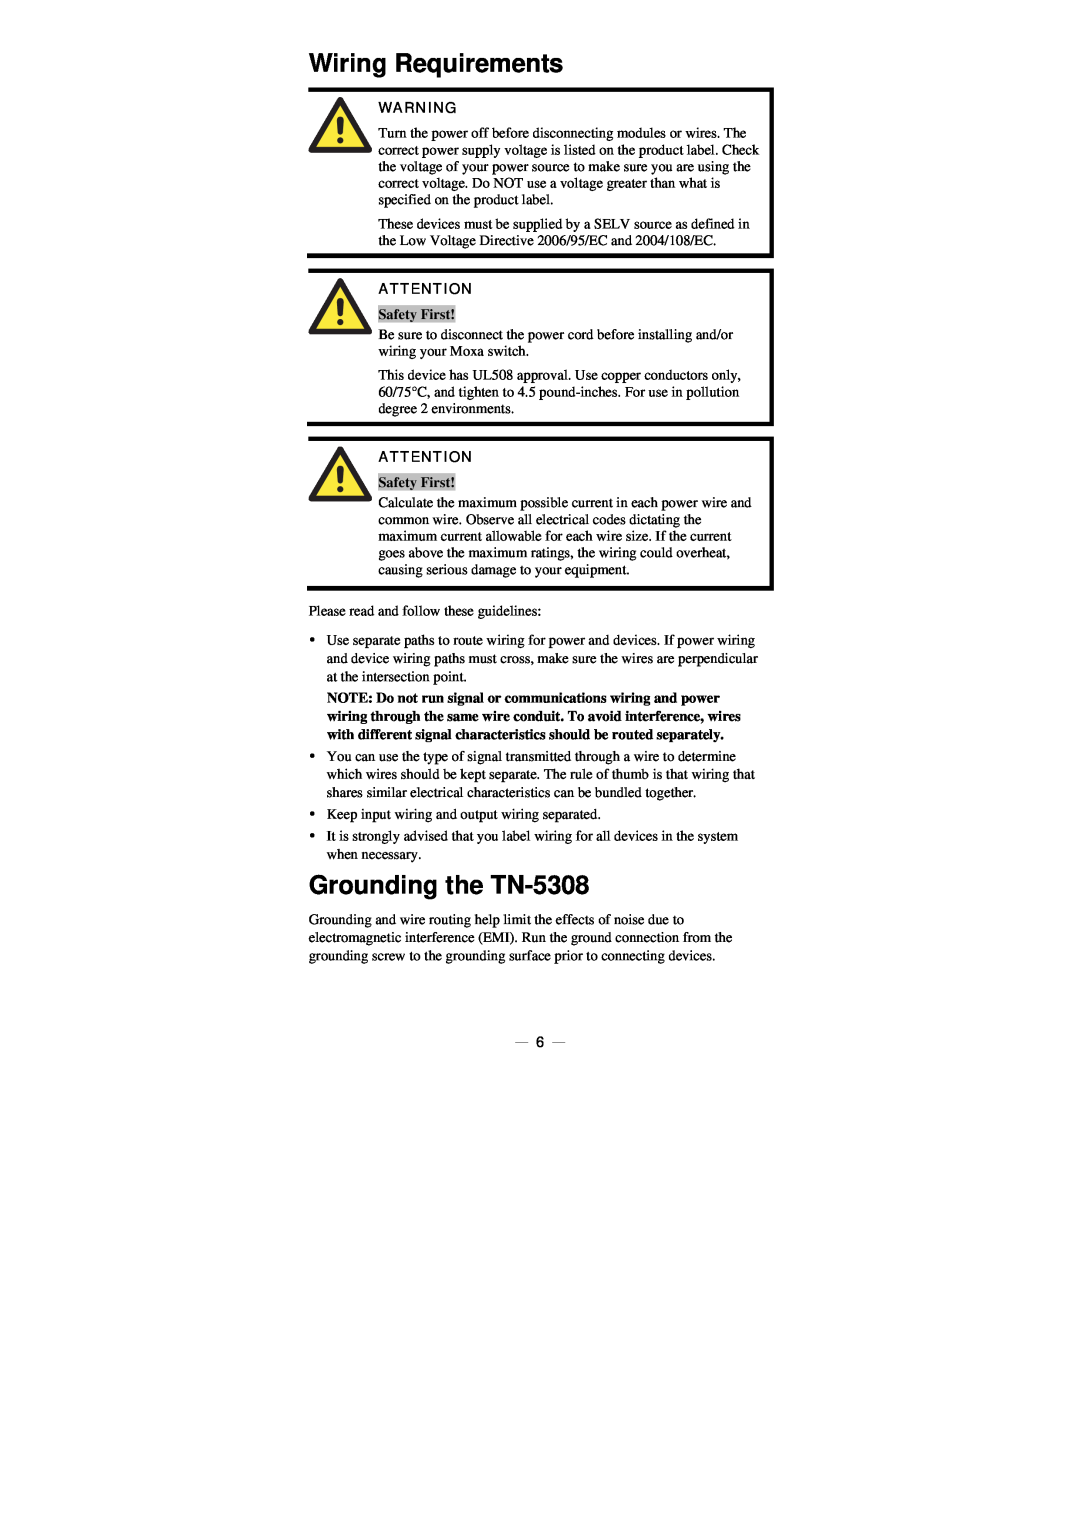 Moxa Technologies manual Wiring Requirements, Grounding the TN-5308, Safety First 